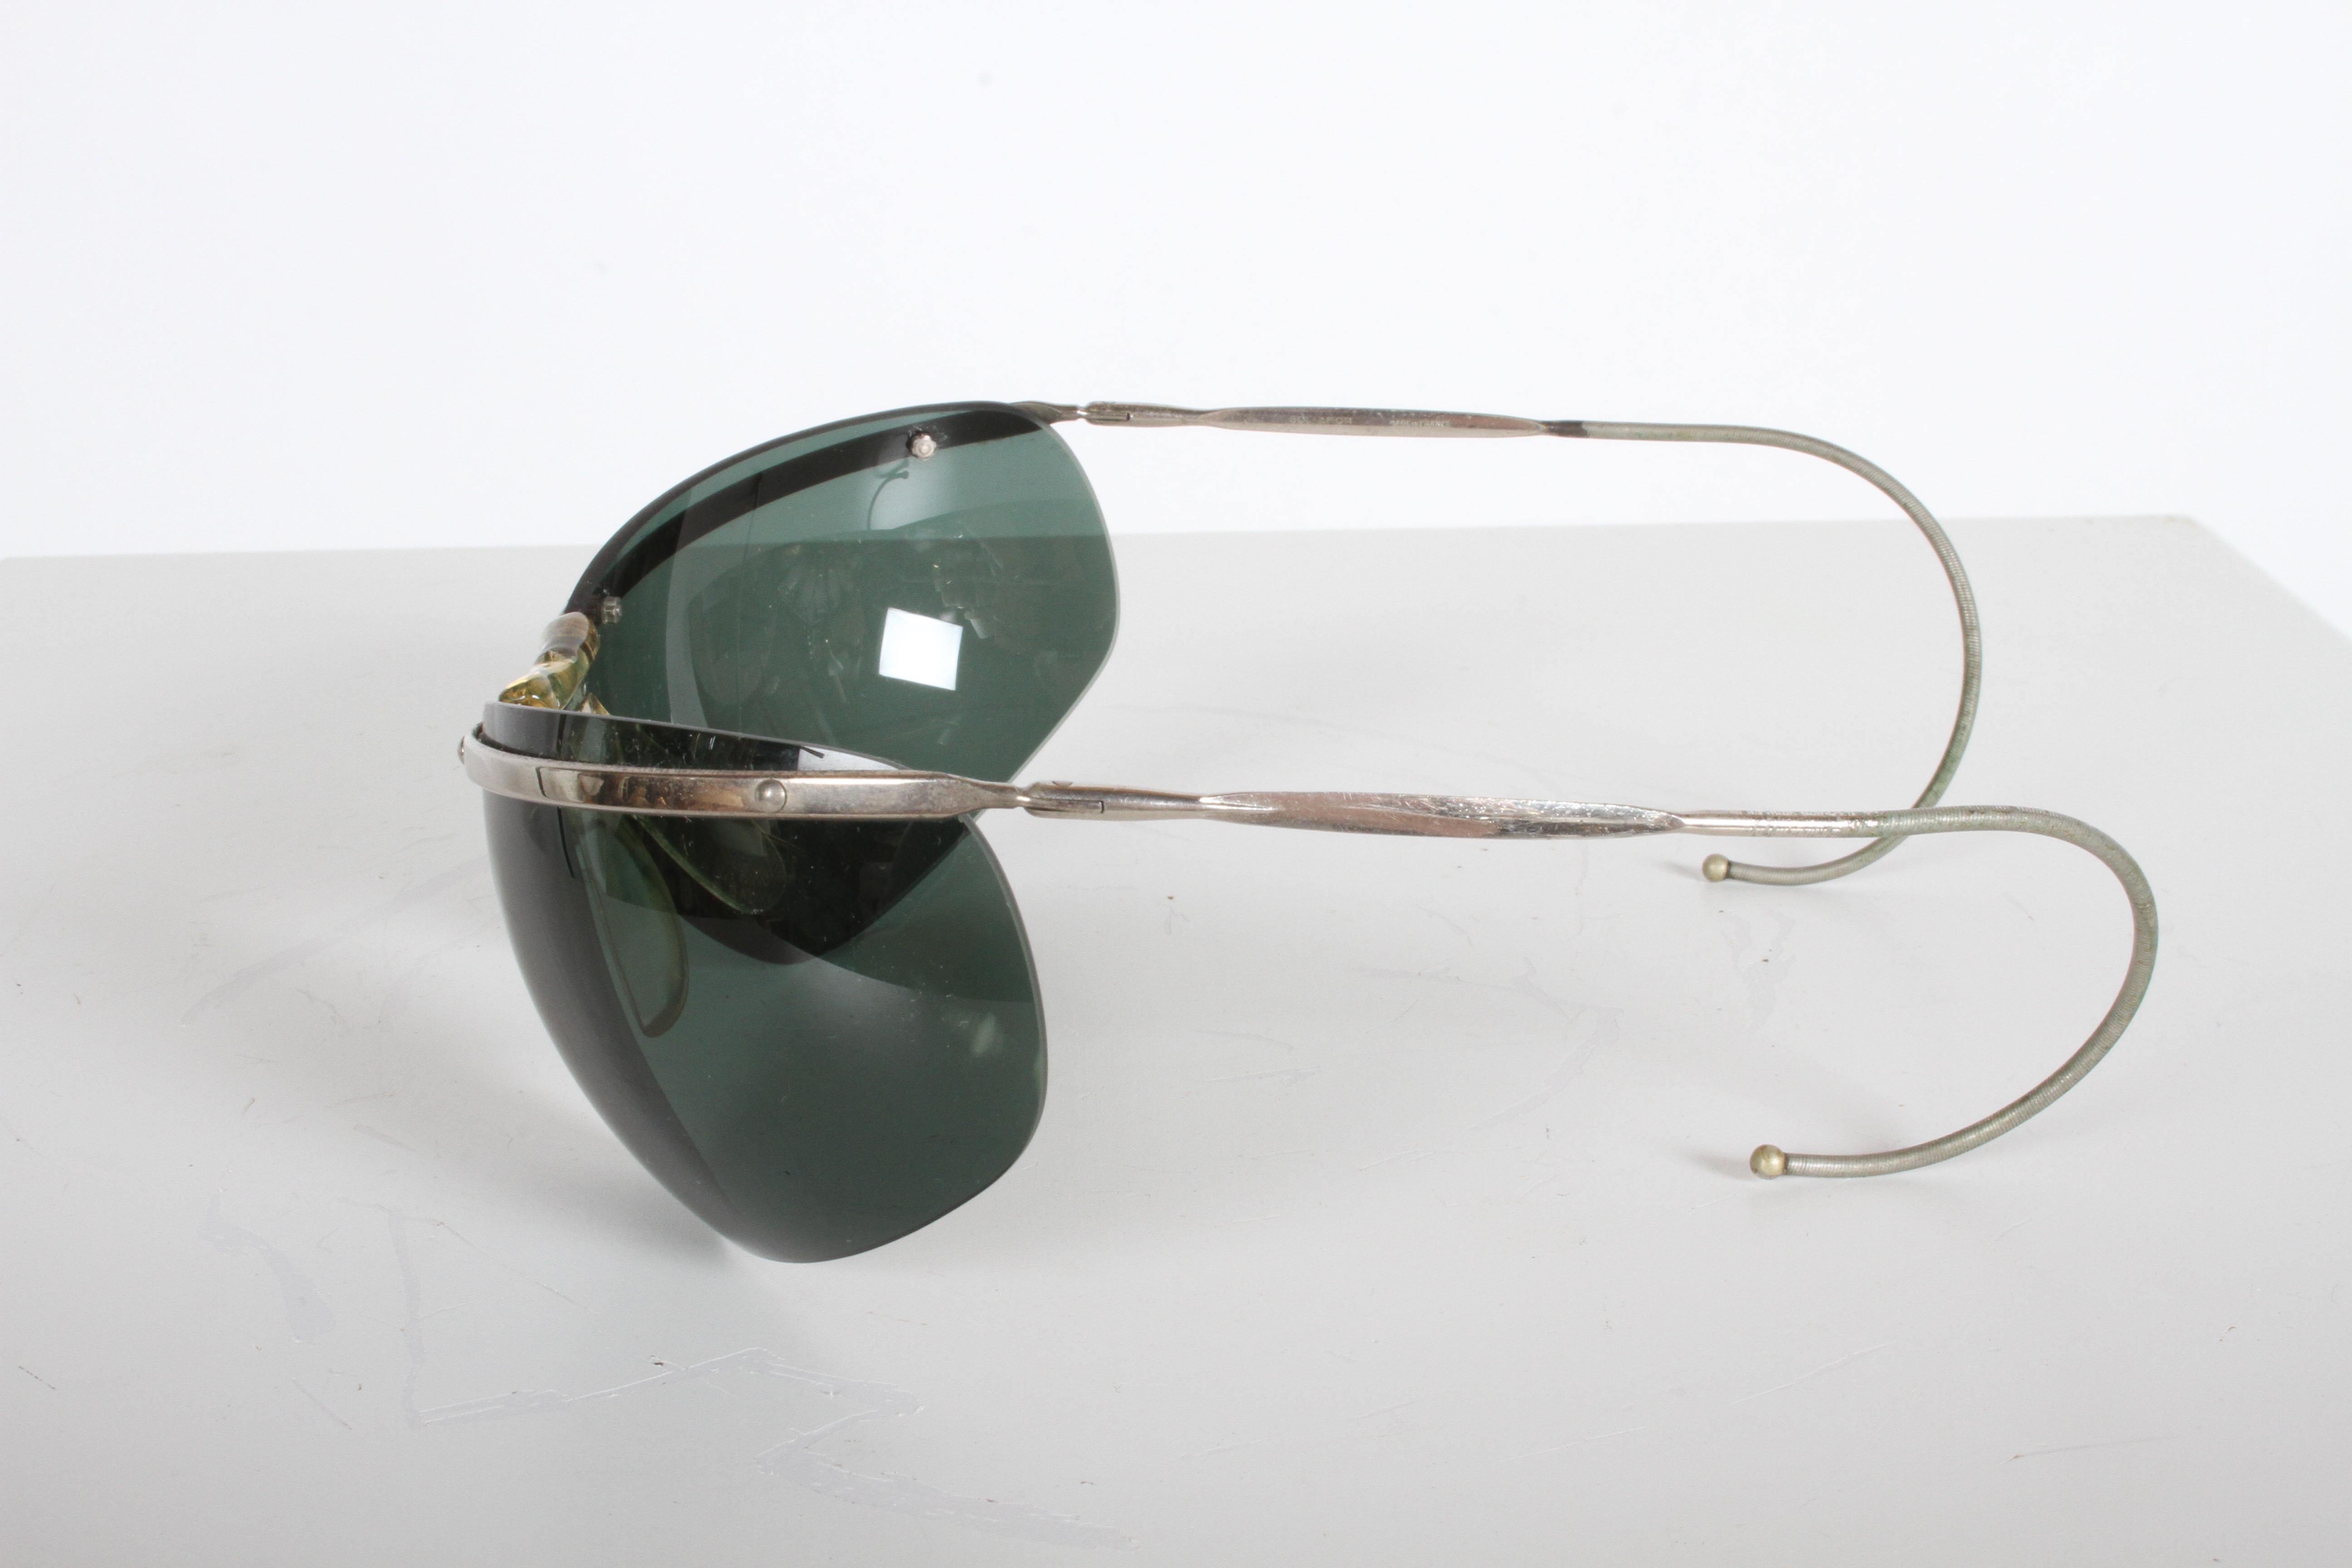 Mid-20th Century Rare Sport Wraparound 1960s Vintage Sunglasses by Sol-Amor France, Green Lenses